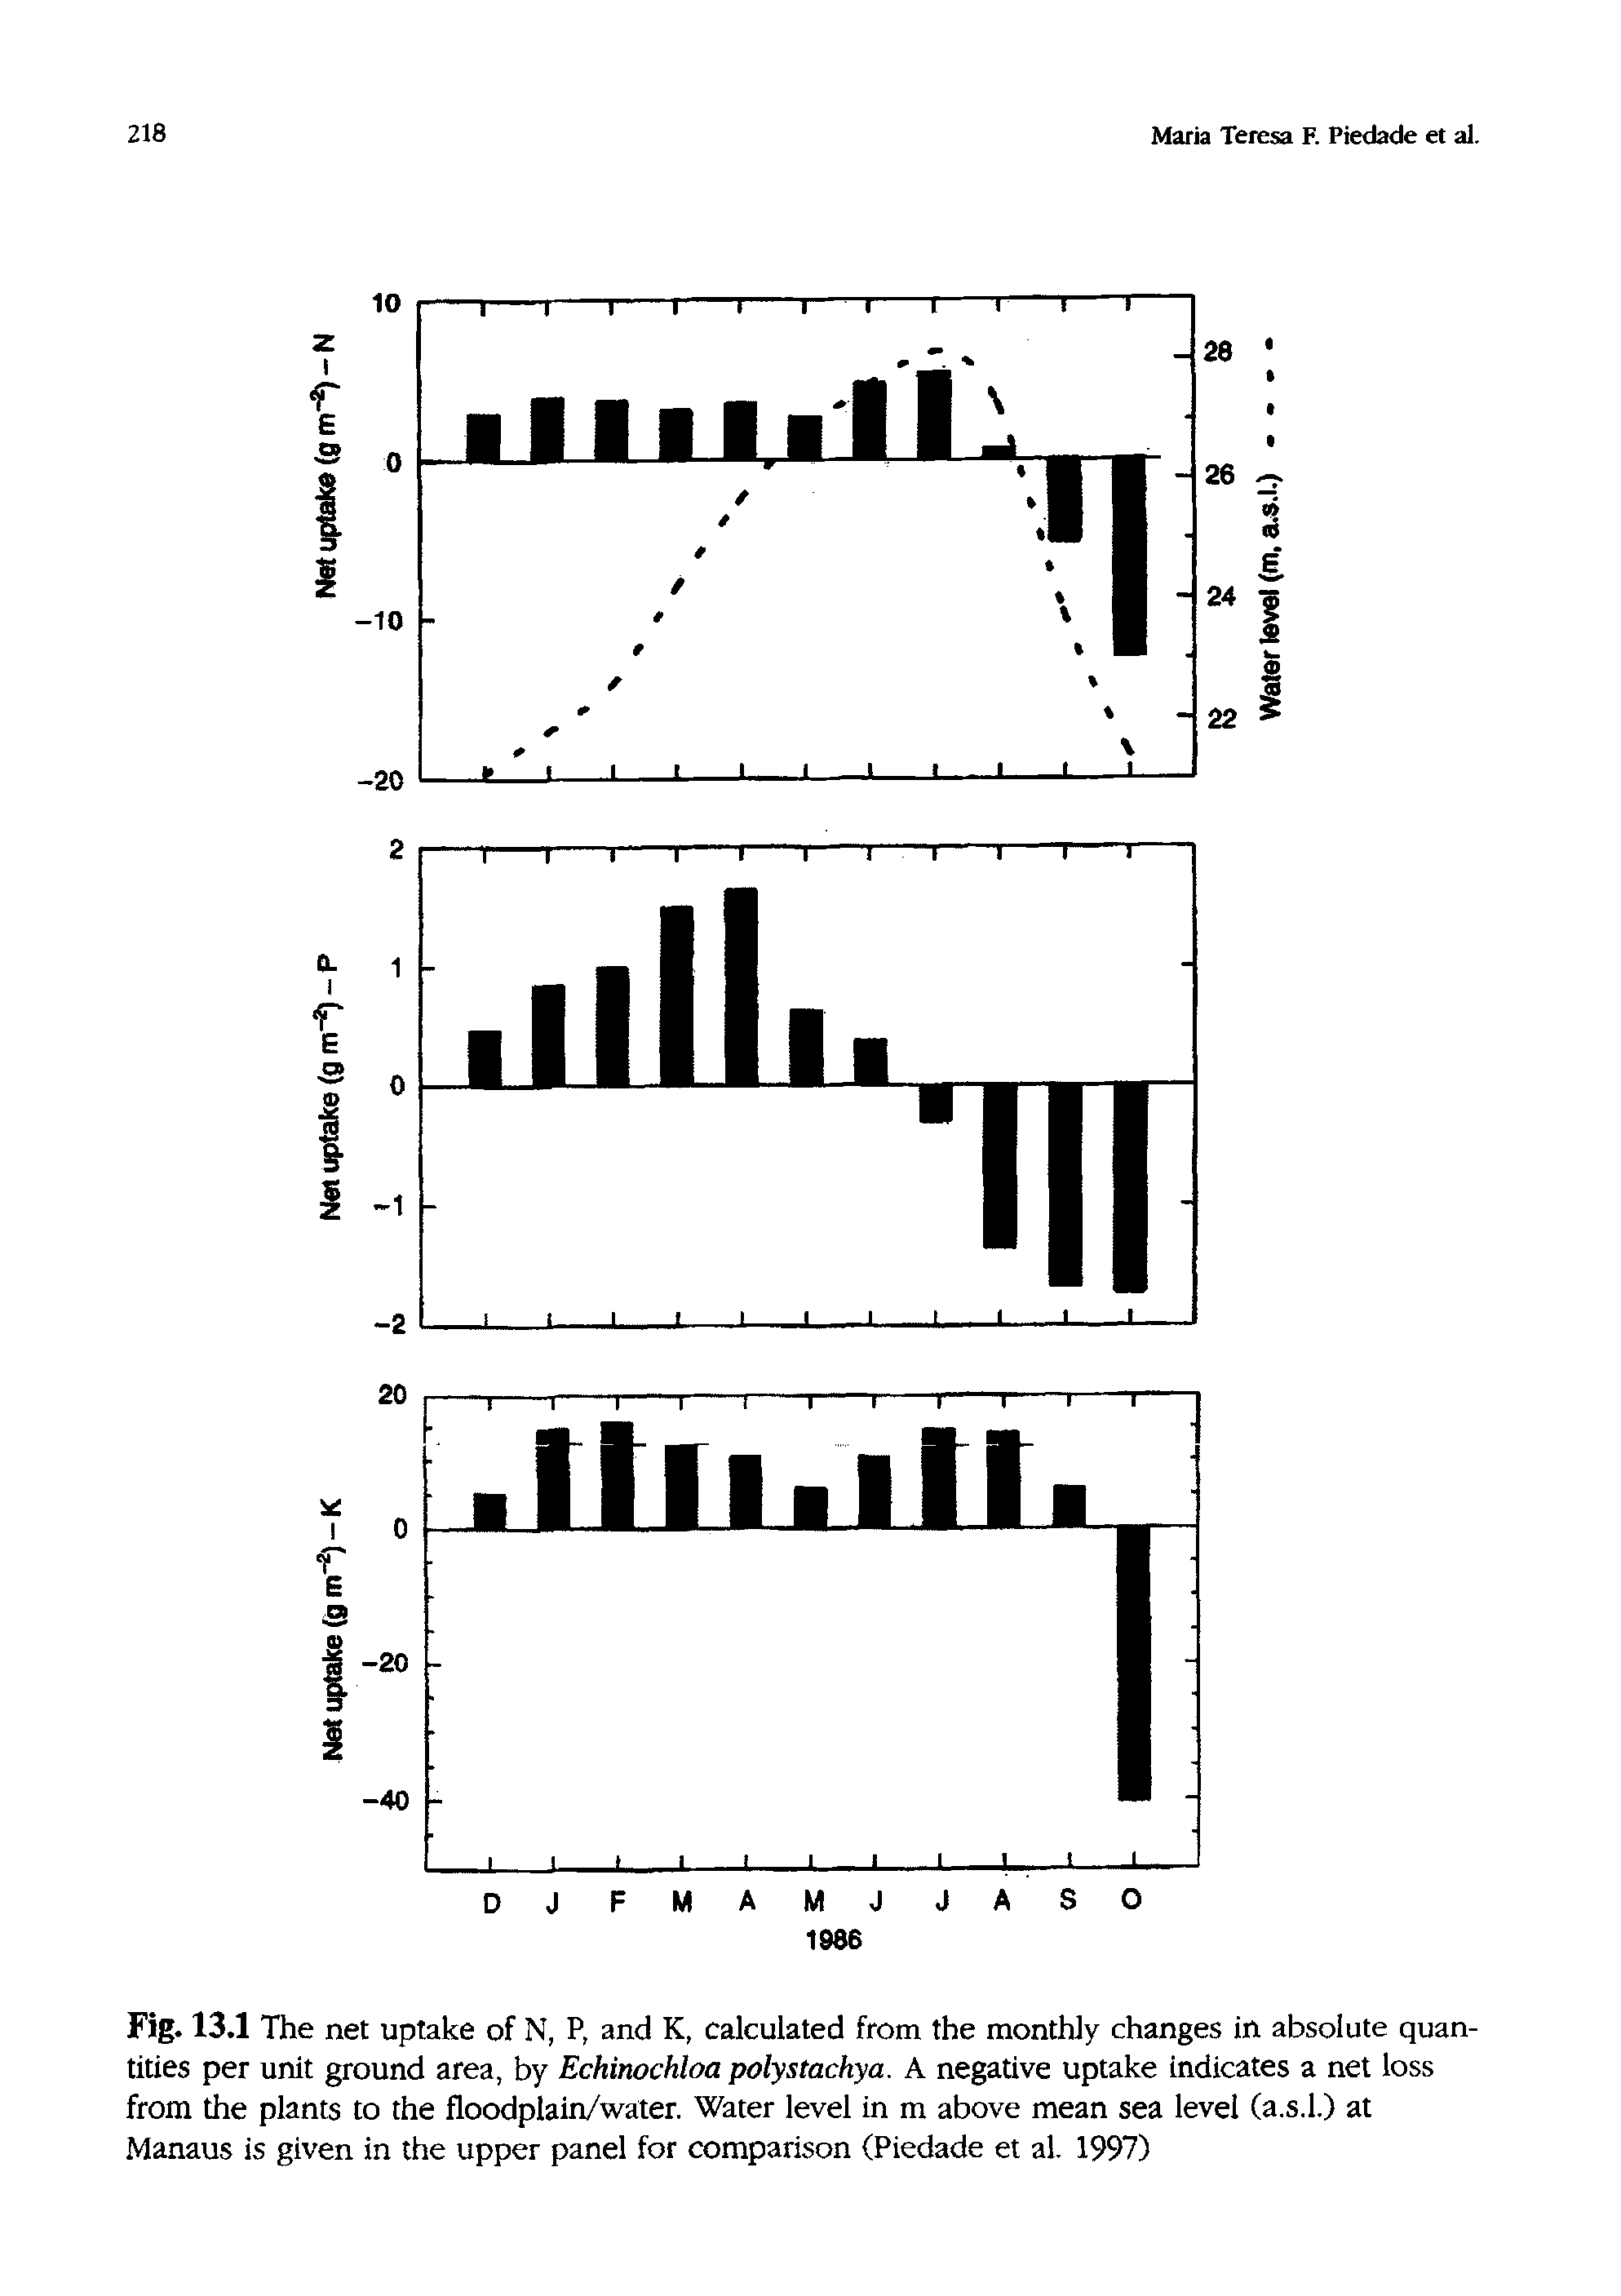 Fig. 13.1 The net uptake of N, P, and K, calculated from the monthly changes in absolute quantities per unit ground area, by Echinochloa polystachya. A negative uptake indicates a net loss from the plants to the floodplain/water. Water level in m above mean sea level (a.s.l.) at Manaus is given in the upper panel for comparison (Piedade et al. 1997)...